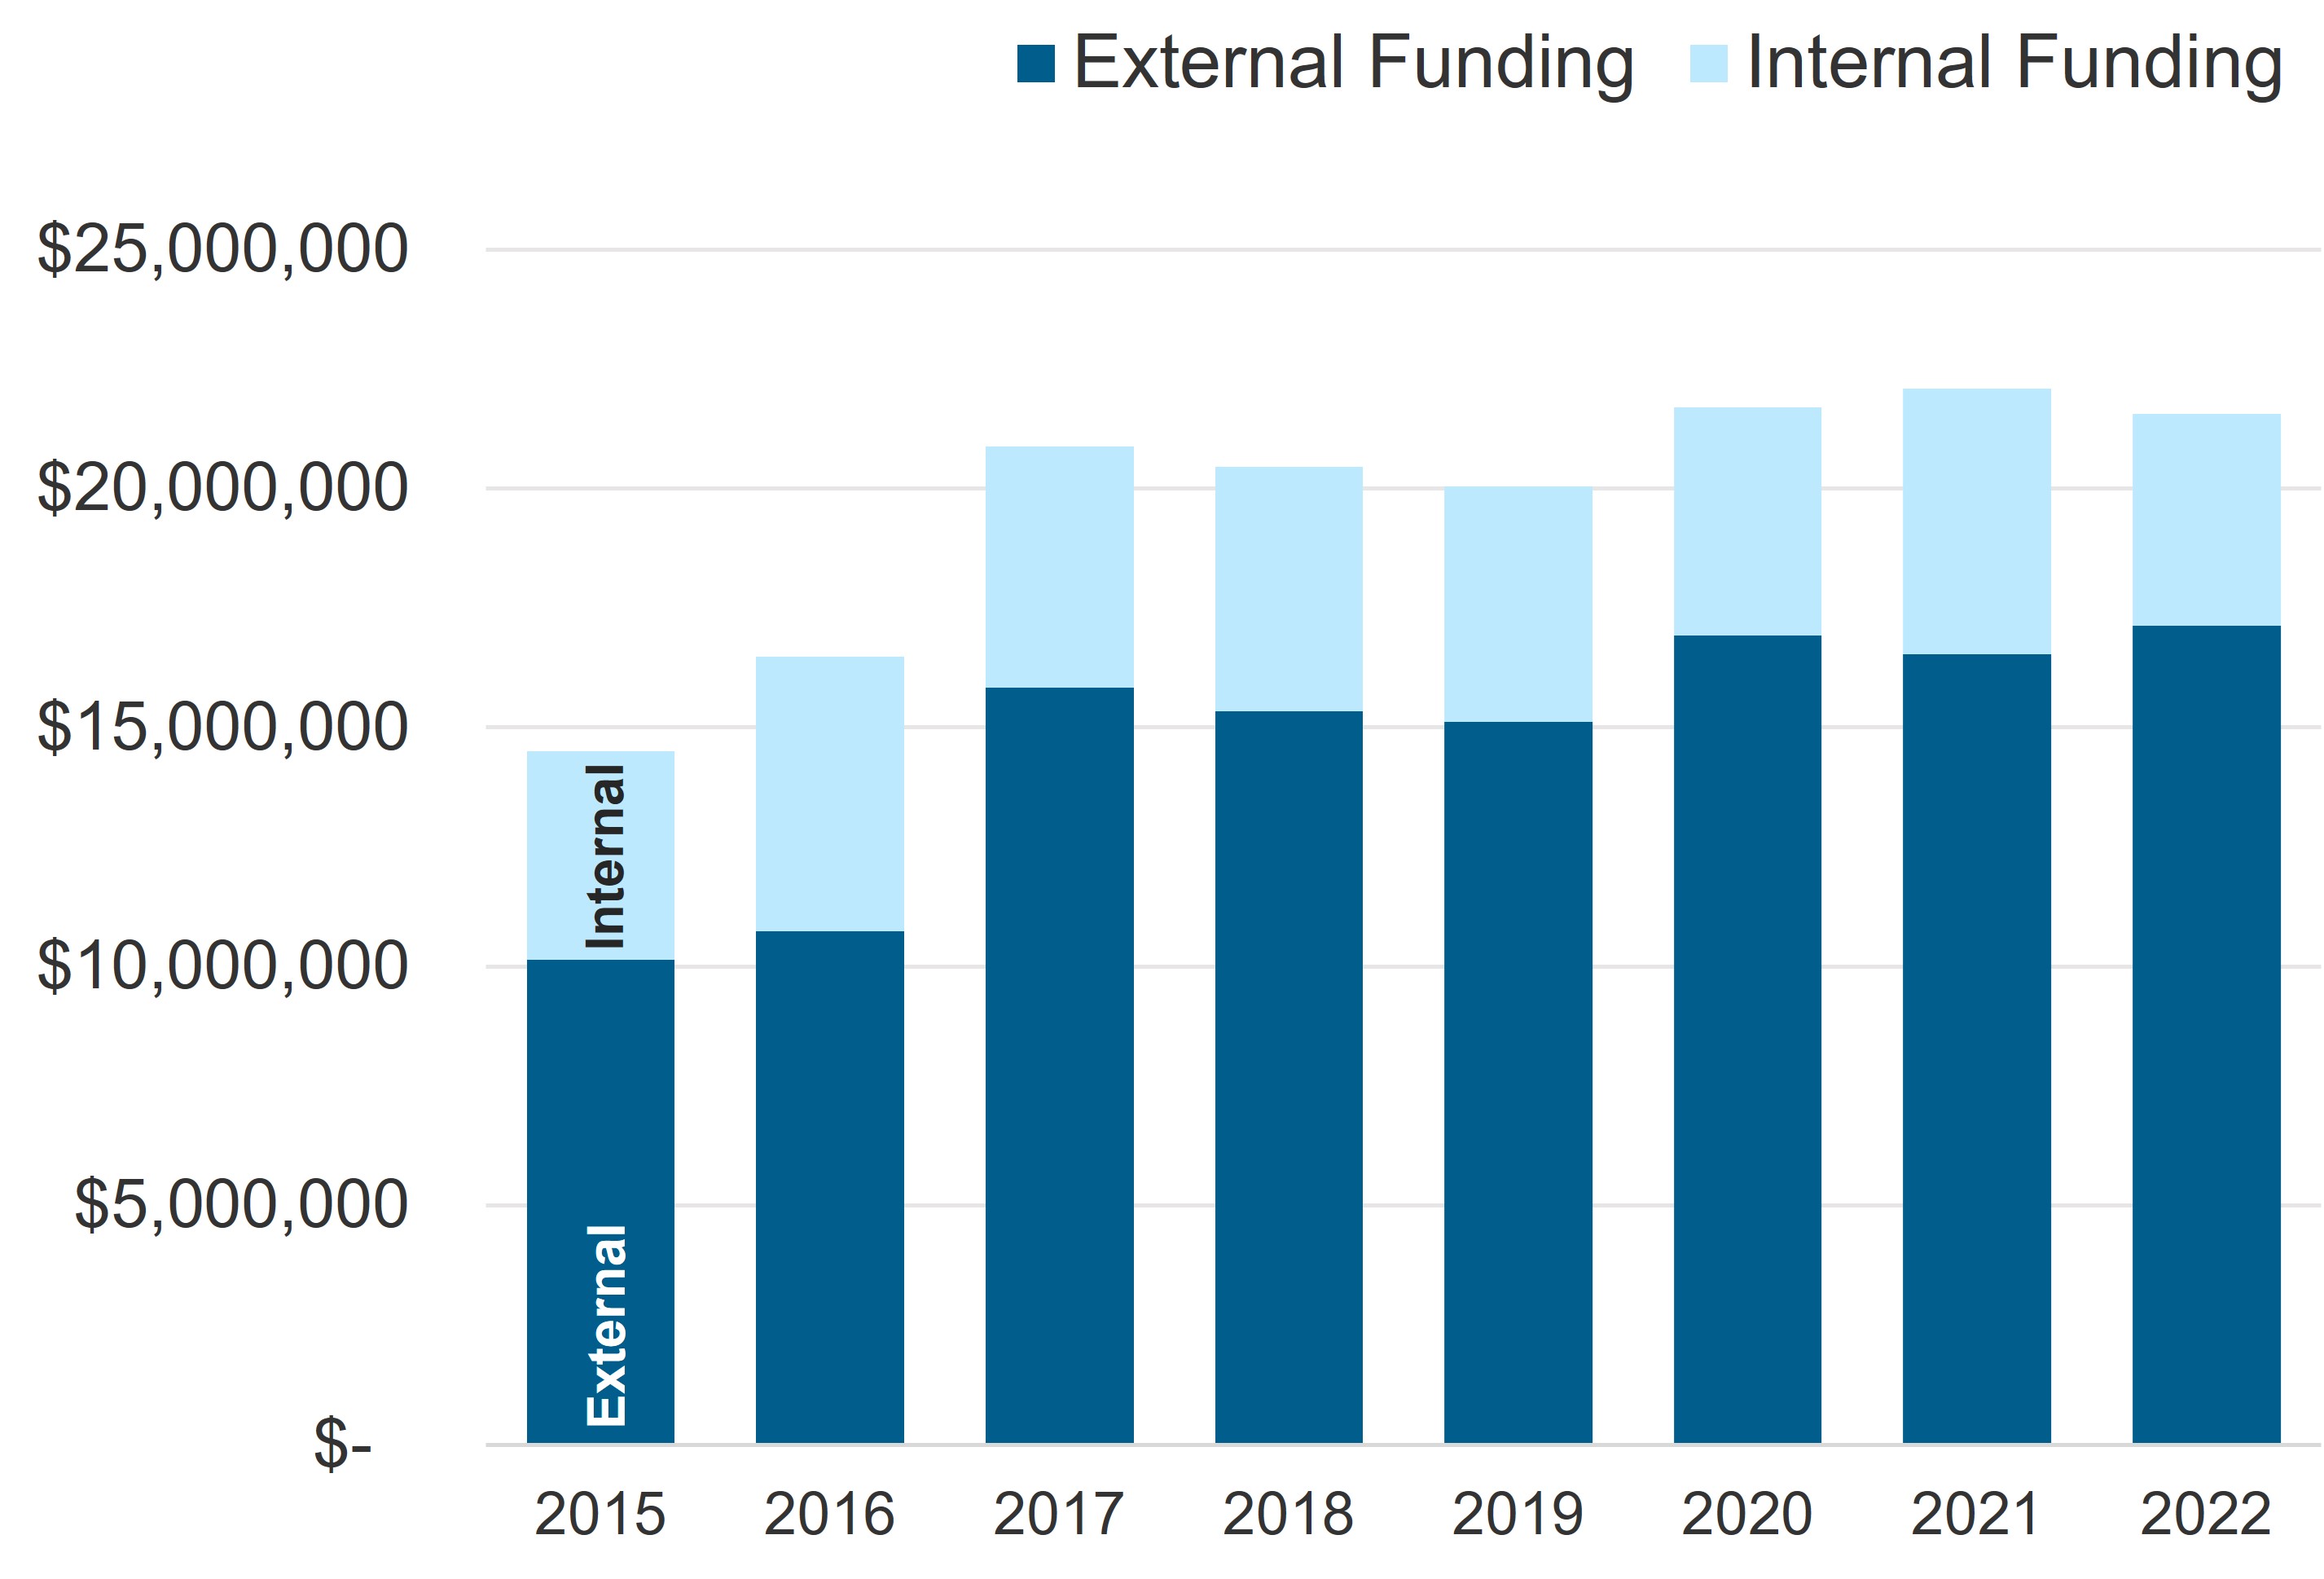 IHR total reseach funds bar chart. External funding has remained about constant from 2015 to 2022.